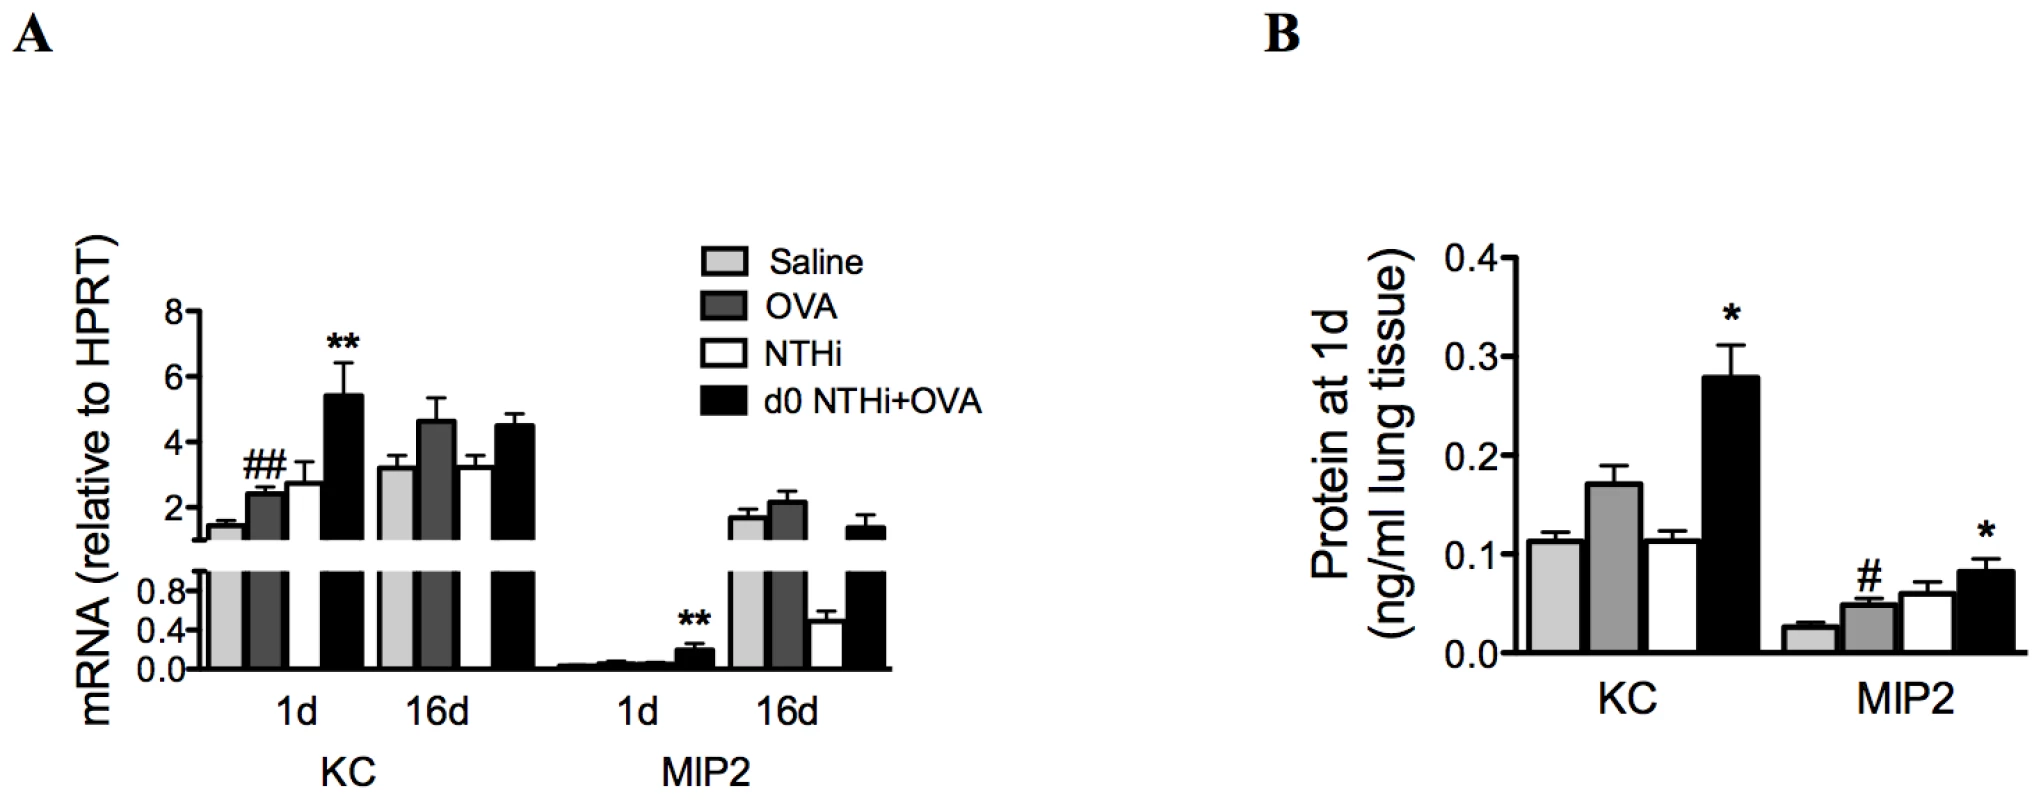 Early neutrophil influx is associated with enhanced neutrophil chemokine expression.